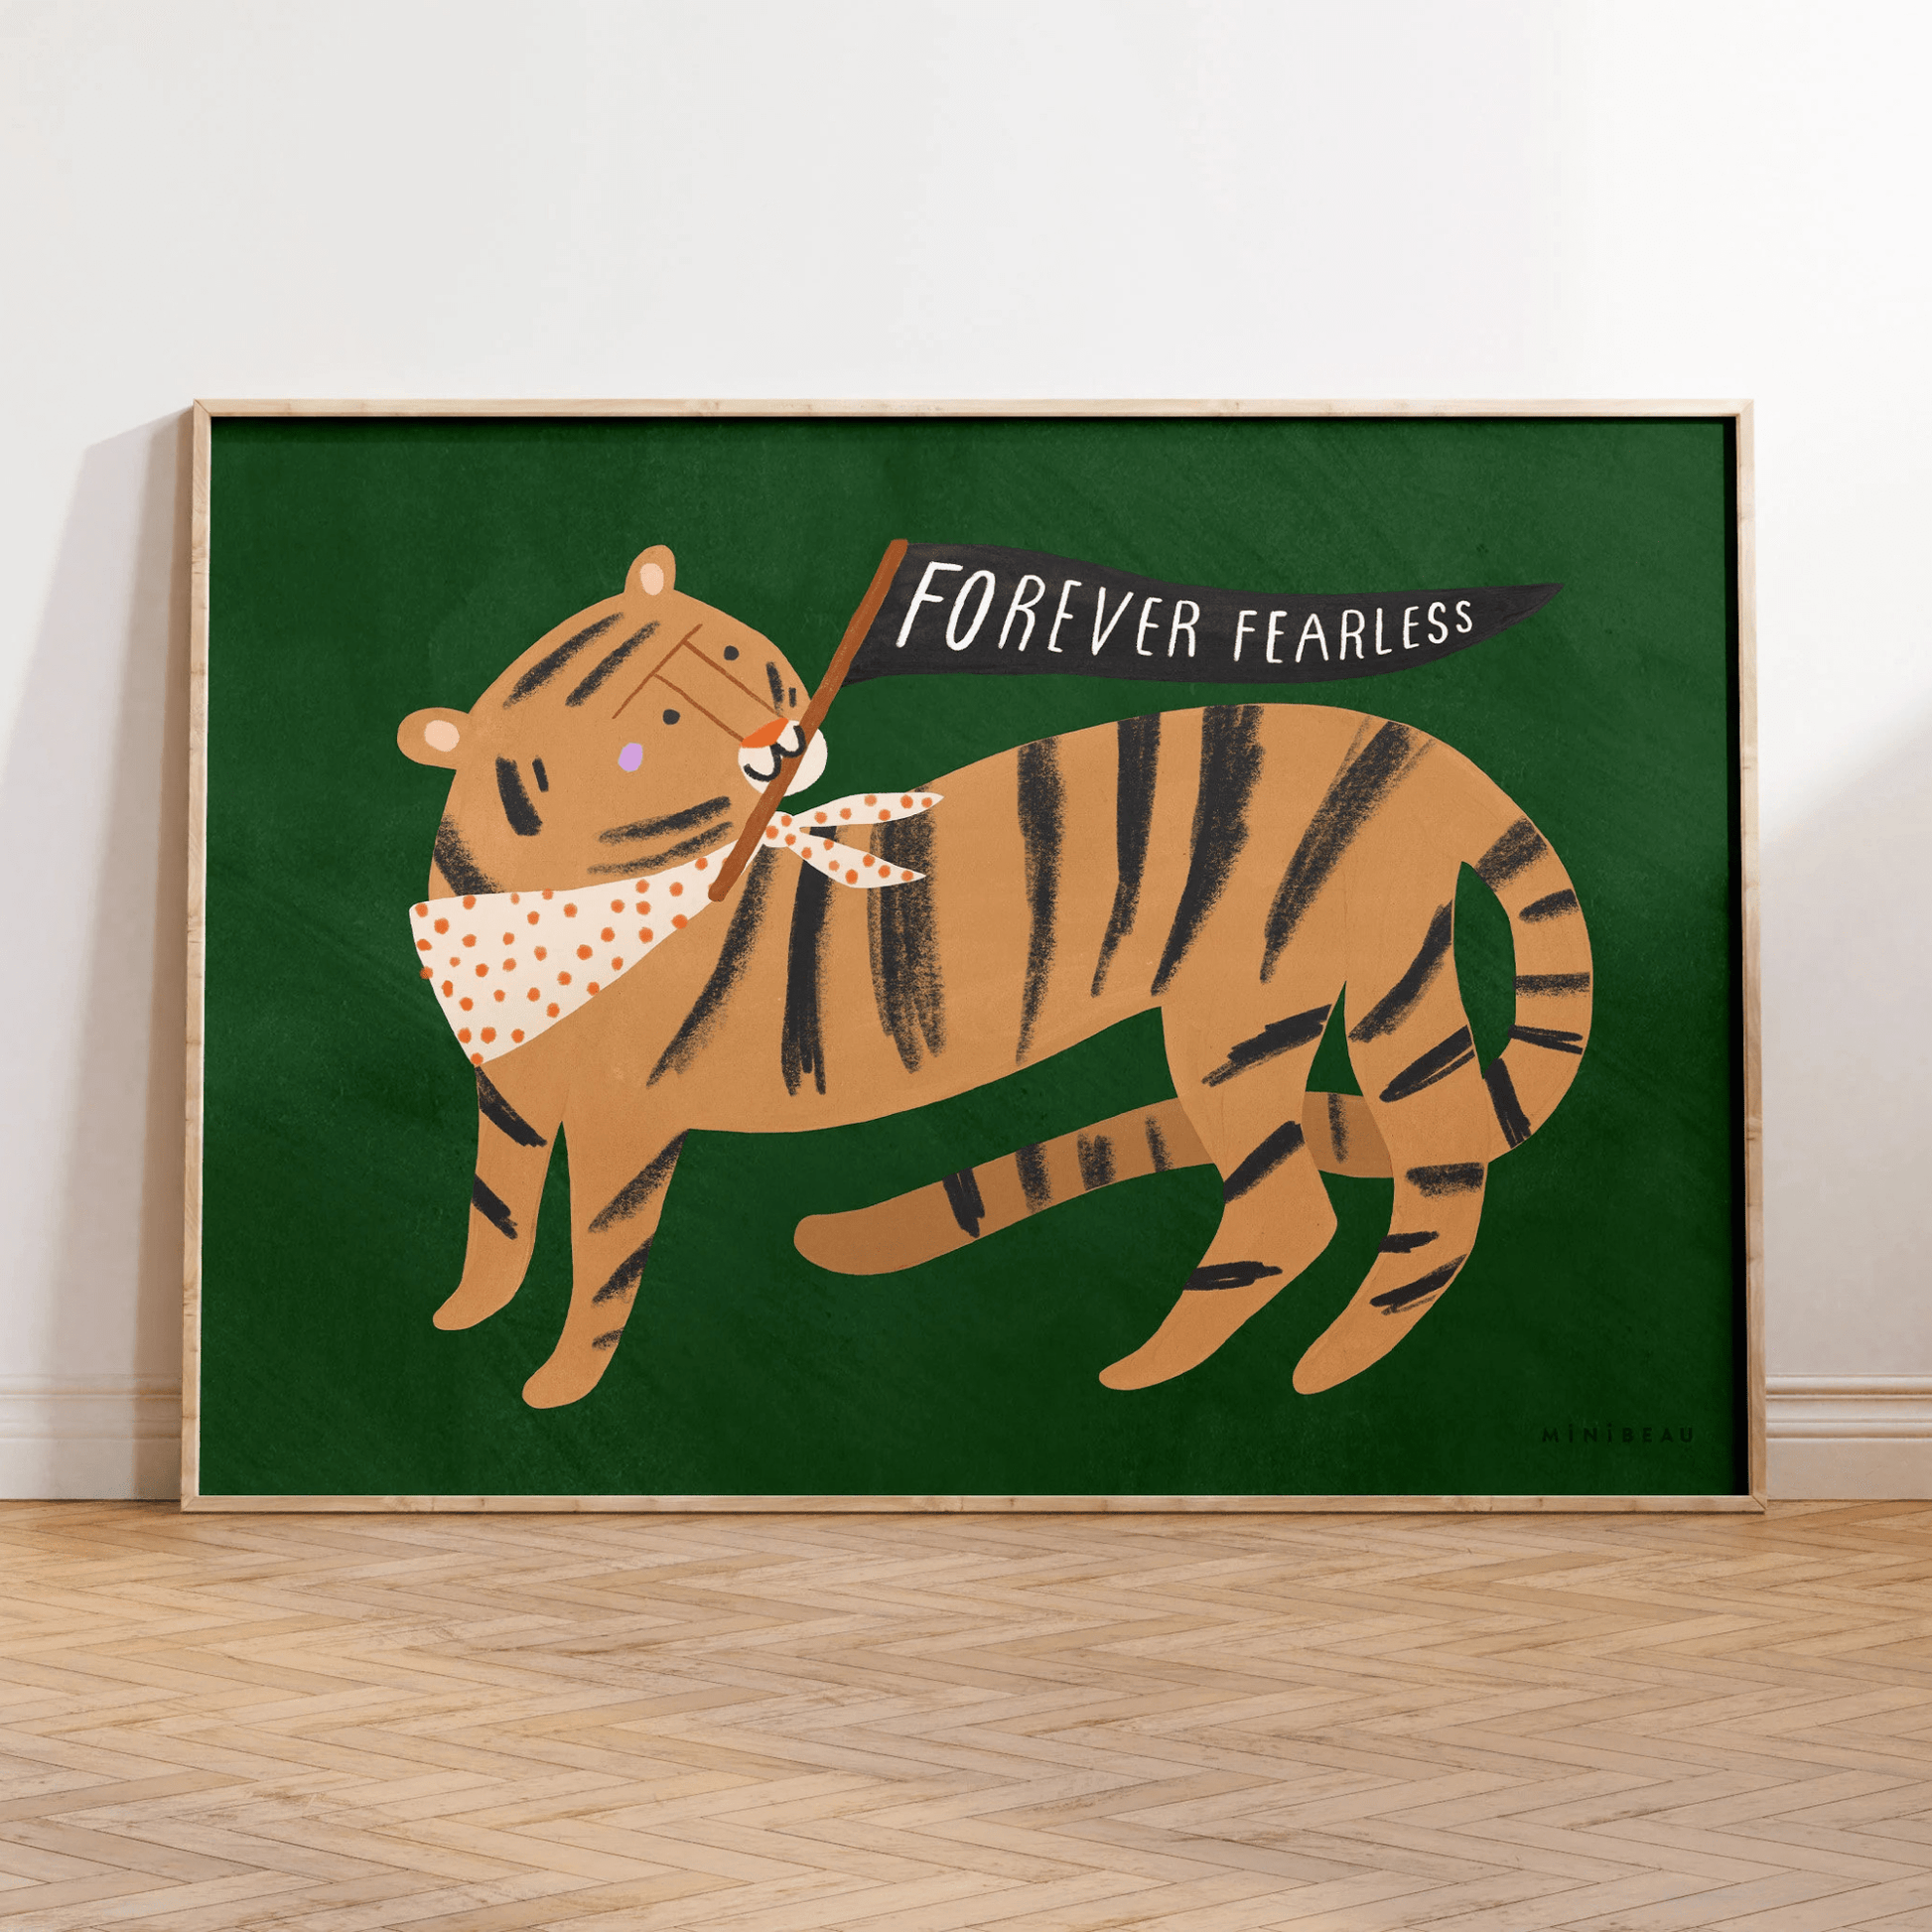 Art print in a light wood frame, leaning against a neutralwall, standing on parque flooring. Our forever fearless art print features a smiling tiger wearing a white bandana with orange polka dots. It's head is turned over it's shoulder and it is holding a black triangle flag with the words FOREVER FEARLESS in white, it it's mouth. All on a green background.